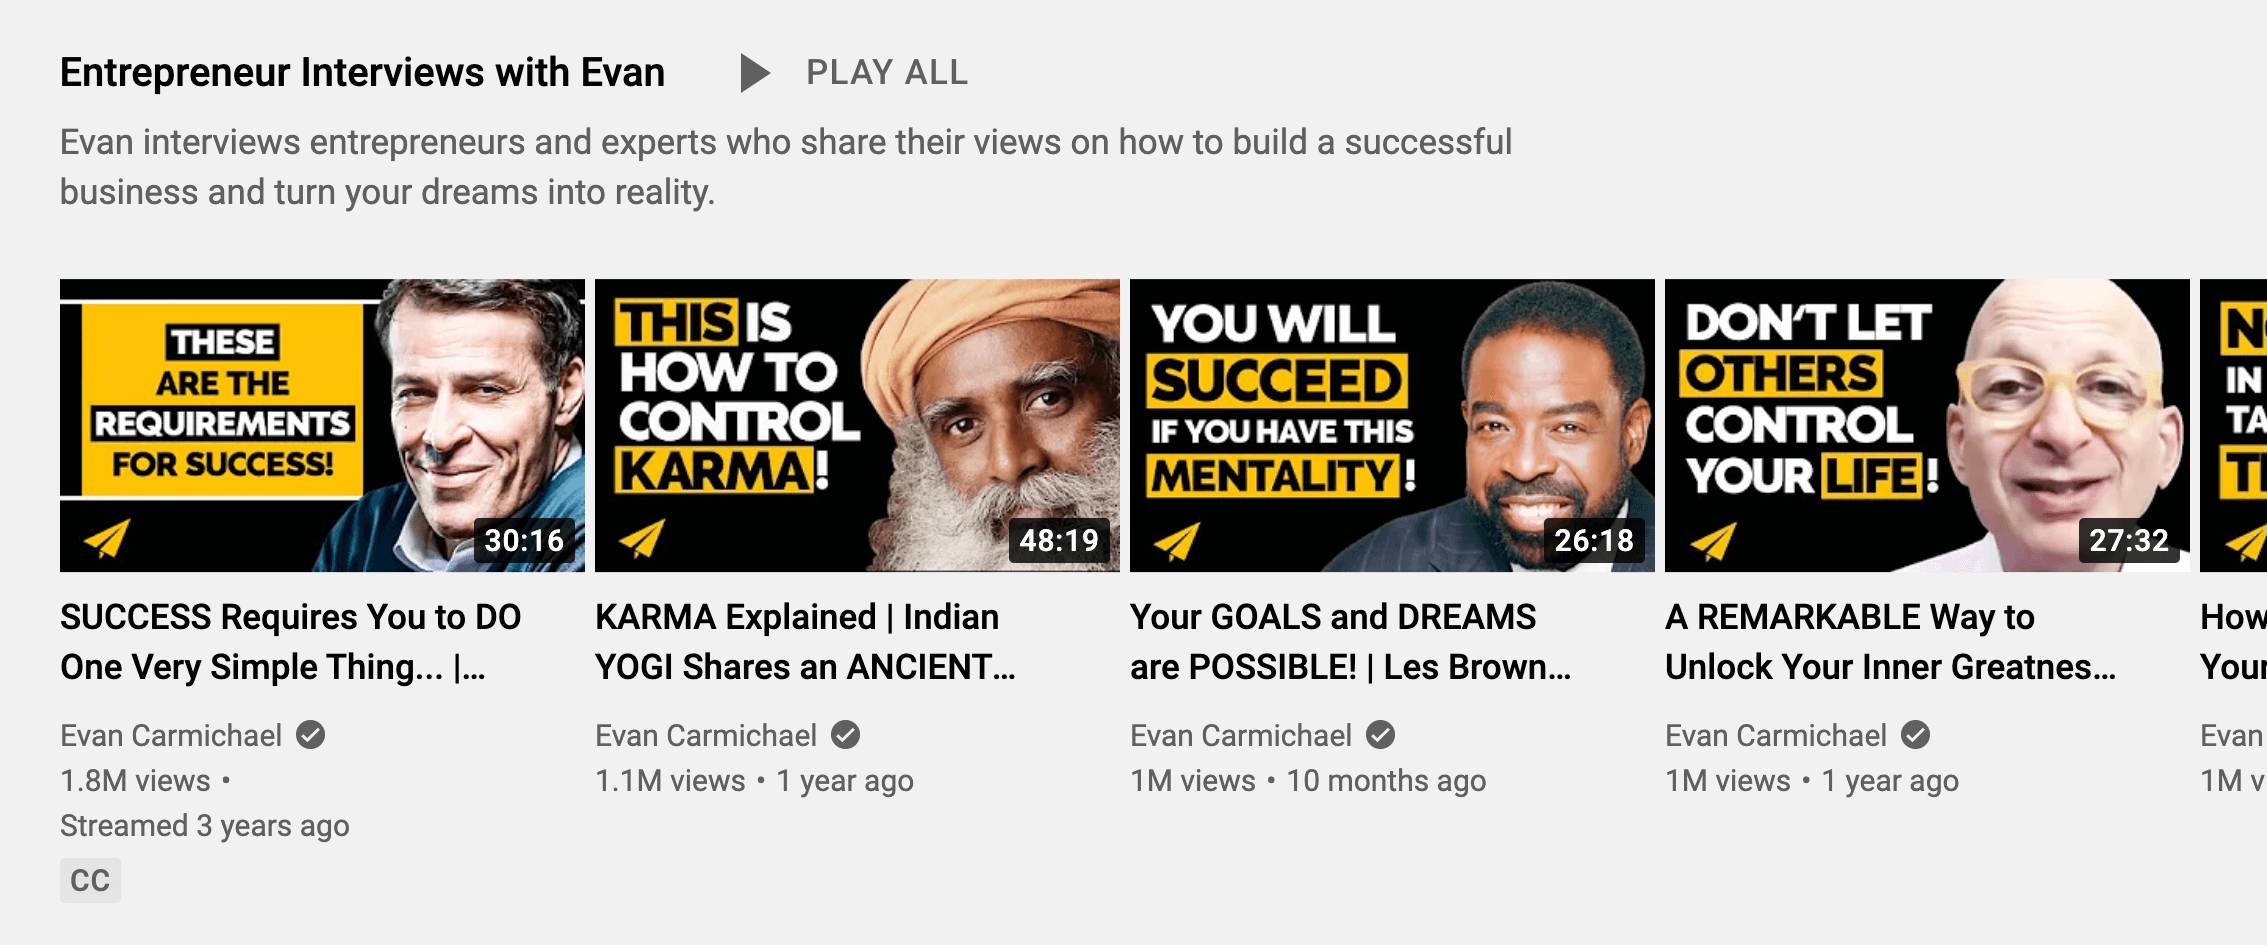 image of YouTube Entrepreneur Interviews With Evan playlist on Evan Carmichael YouTube channel